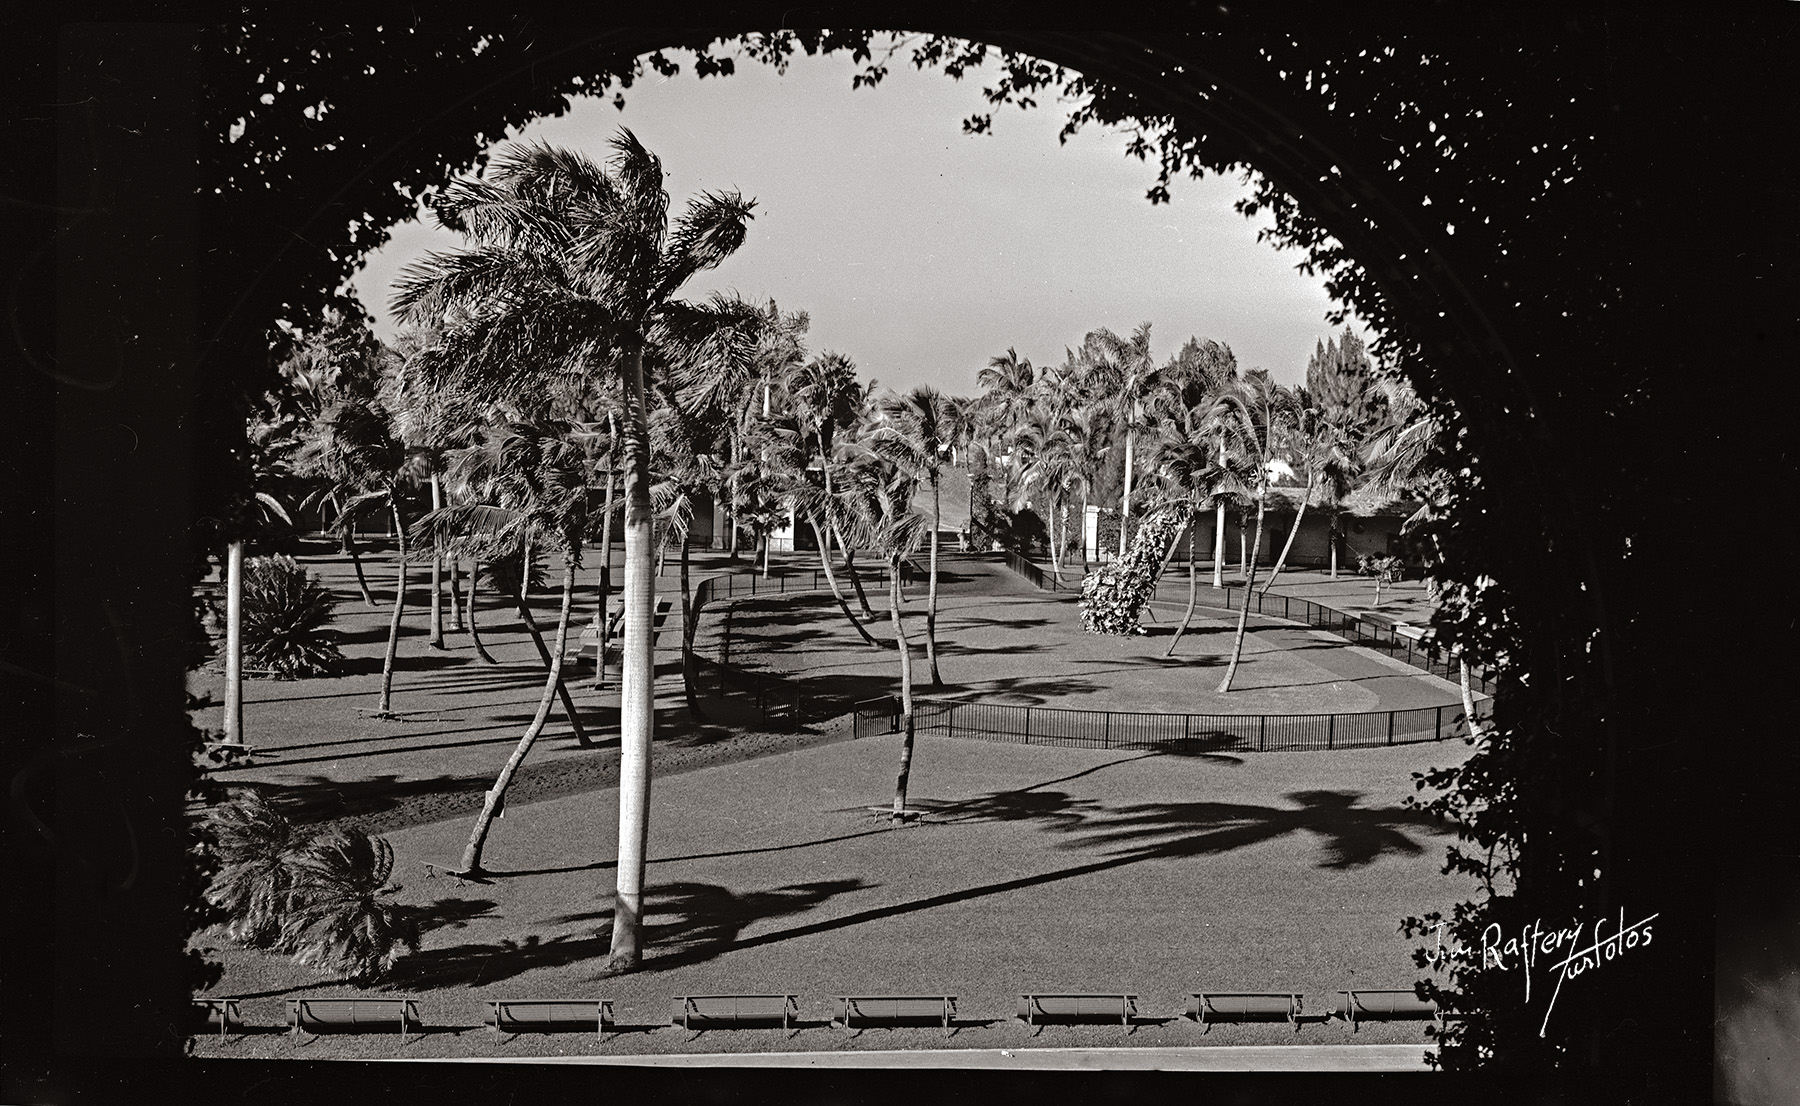 Hialeah Park. One of Raftery's earliest negatives, likely from 1941. (Jim Raftery Turfotos)